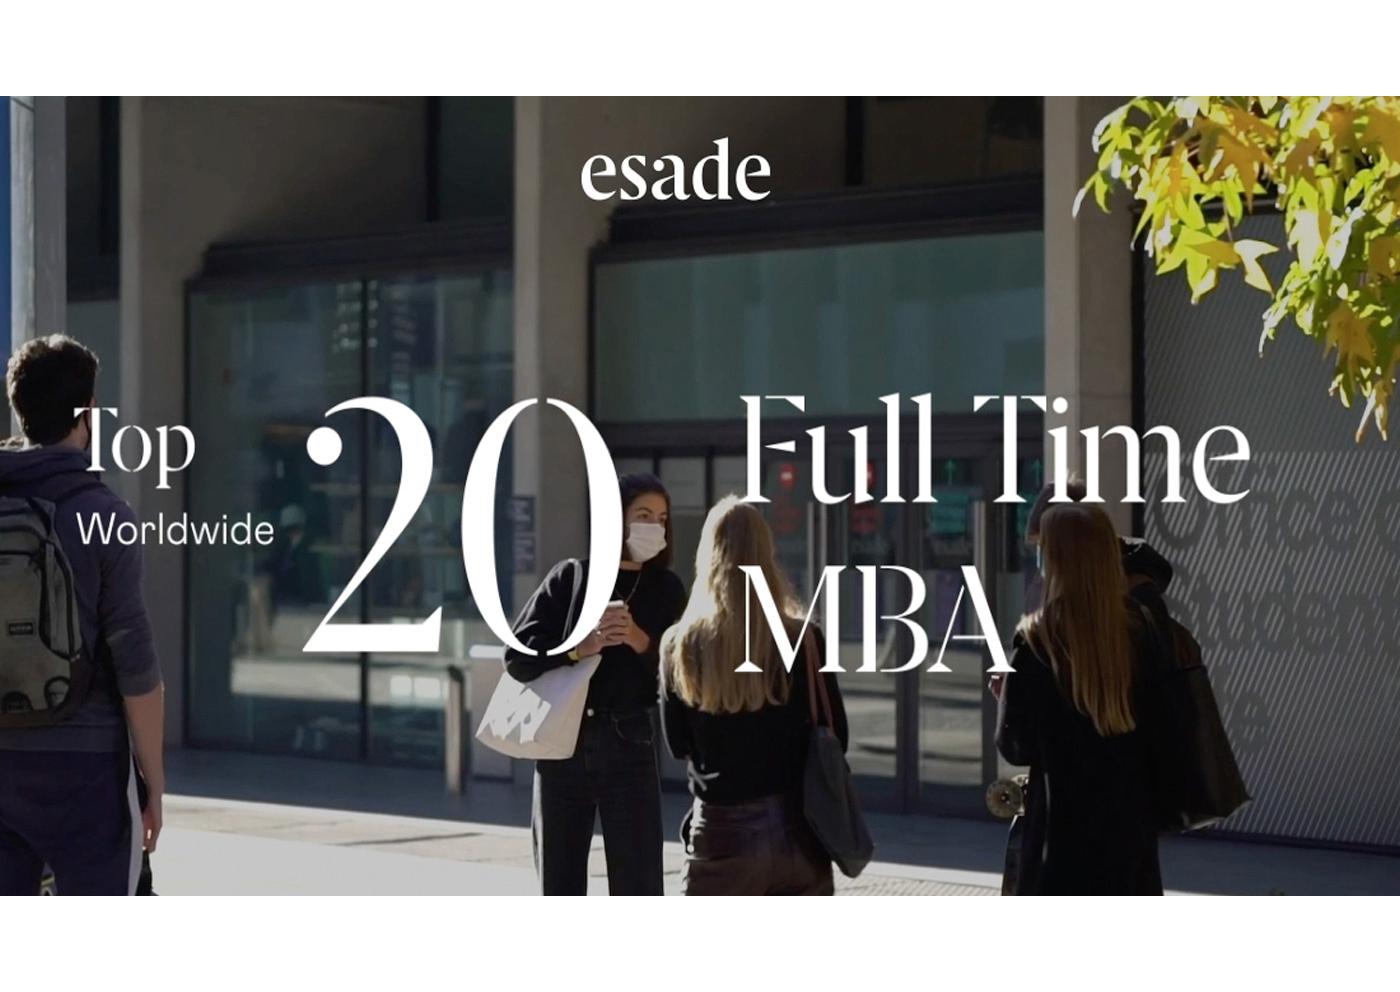 Esade MBA one of the top 20 in the world in Financial Times ranking